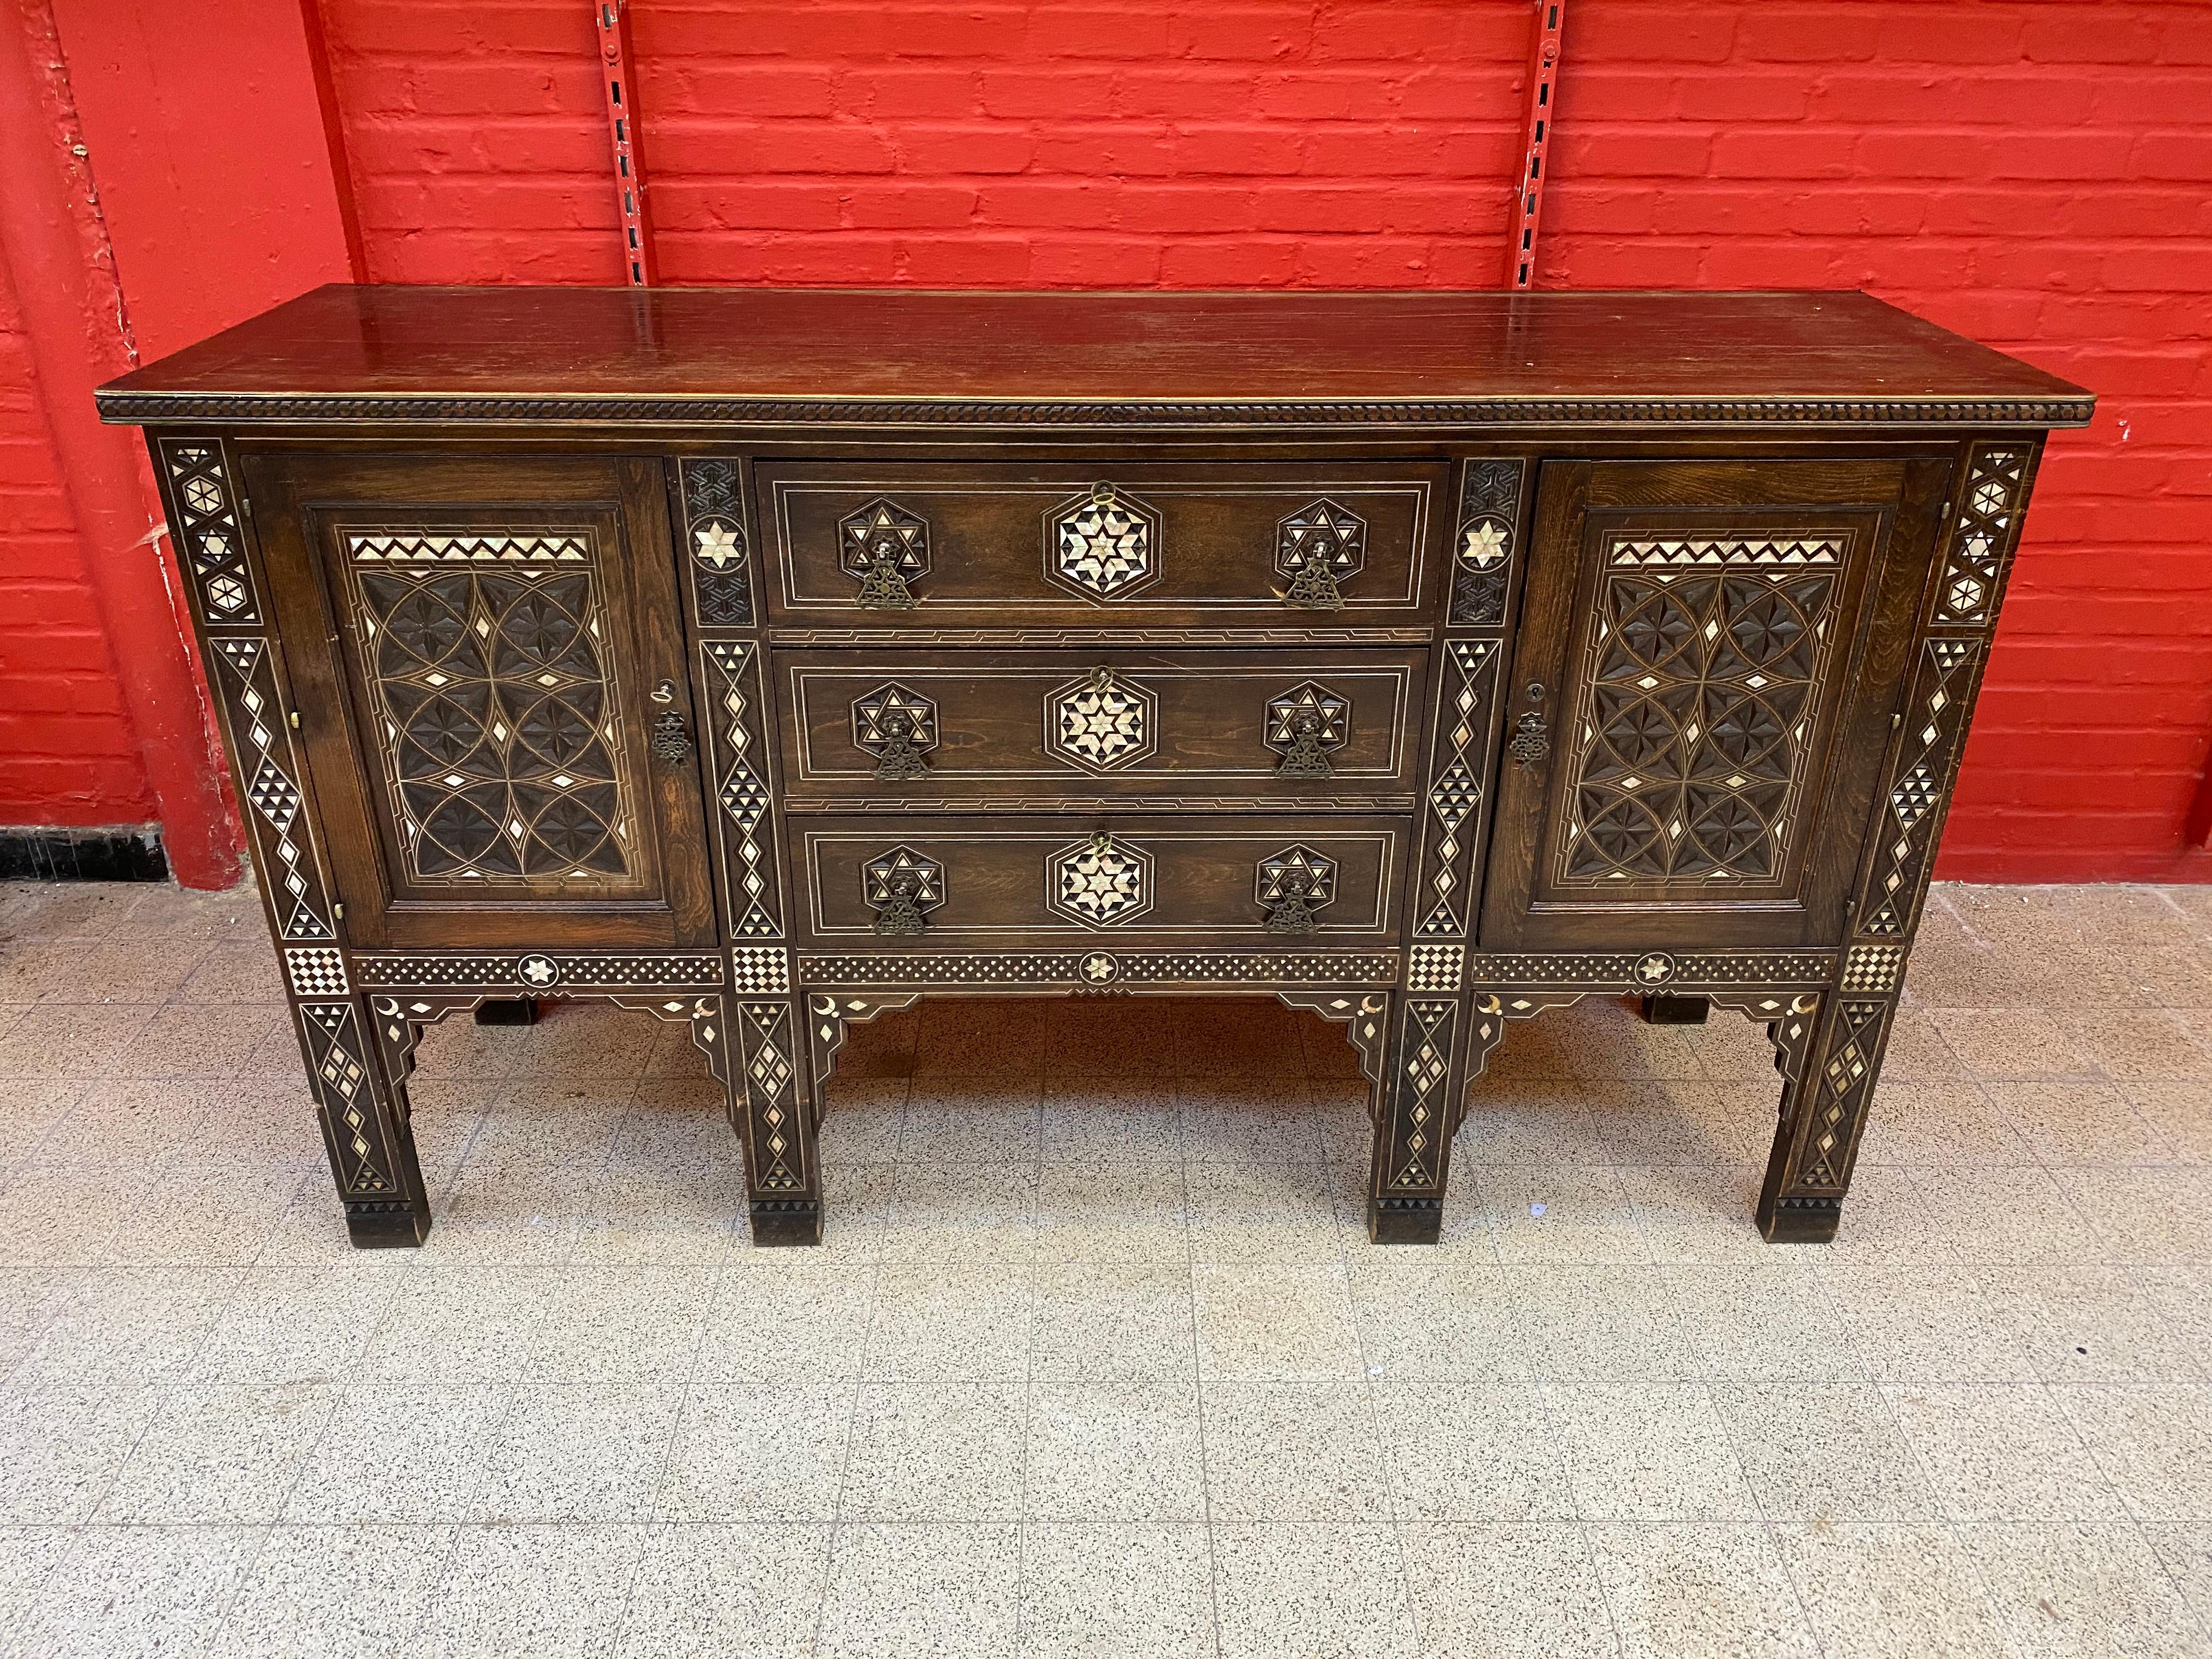 Large Oriental-Style Sideboard in carved Wood, with Mother-of-Pearl Inlay, 1880 For Sale 1